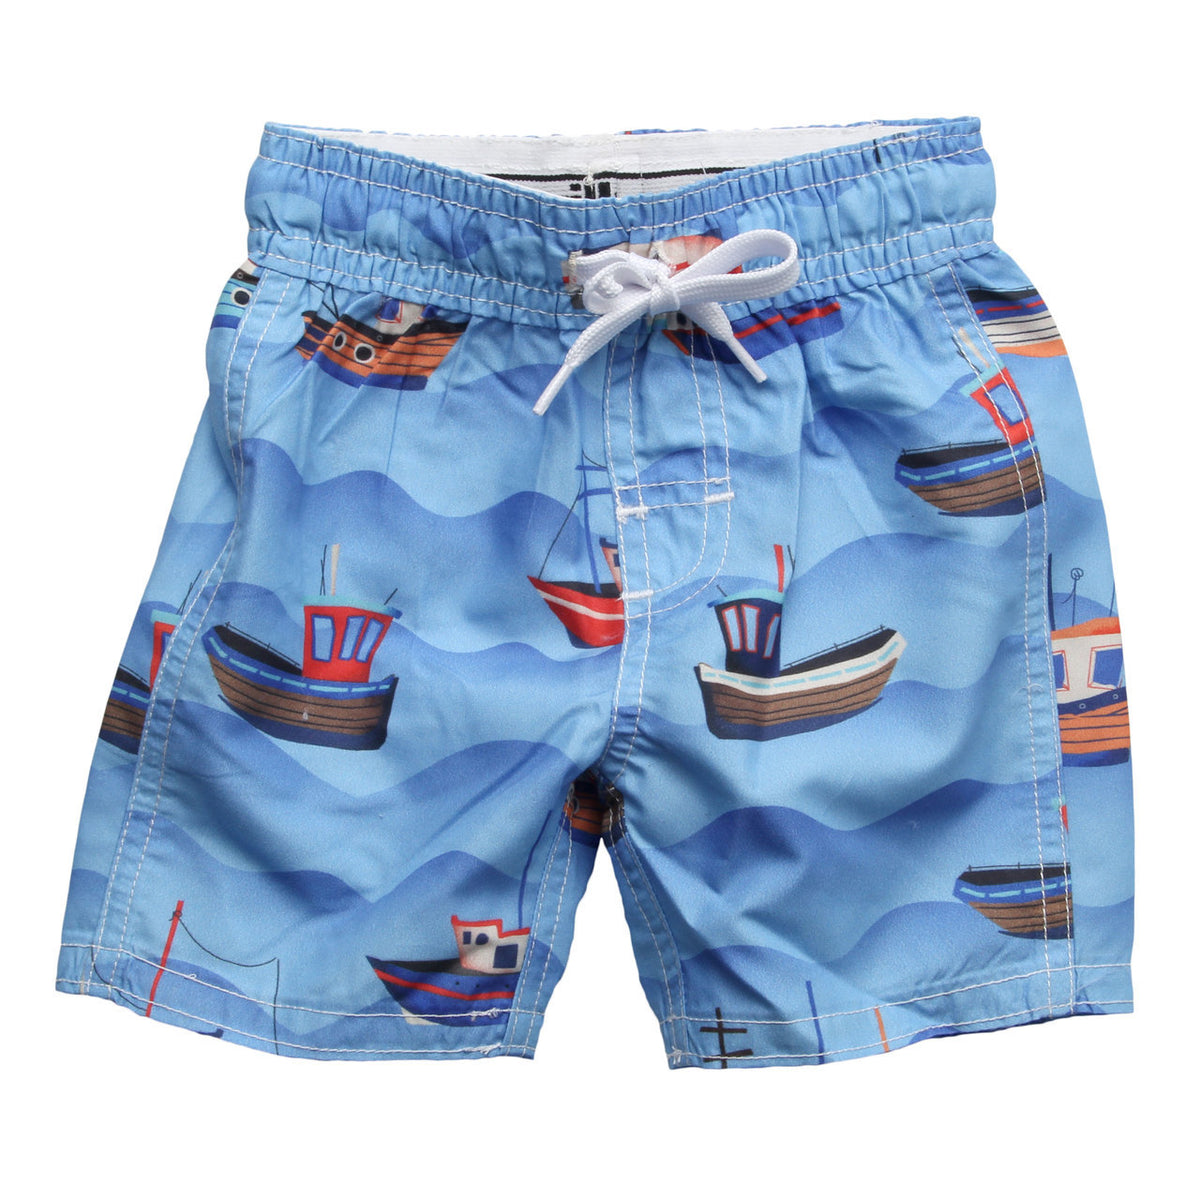 Wes and Willy Fishing Boats Swim Trunks